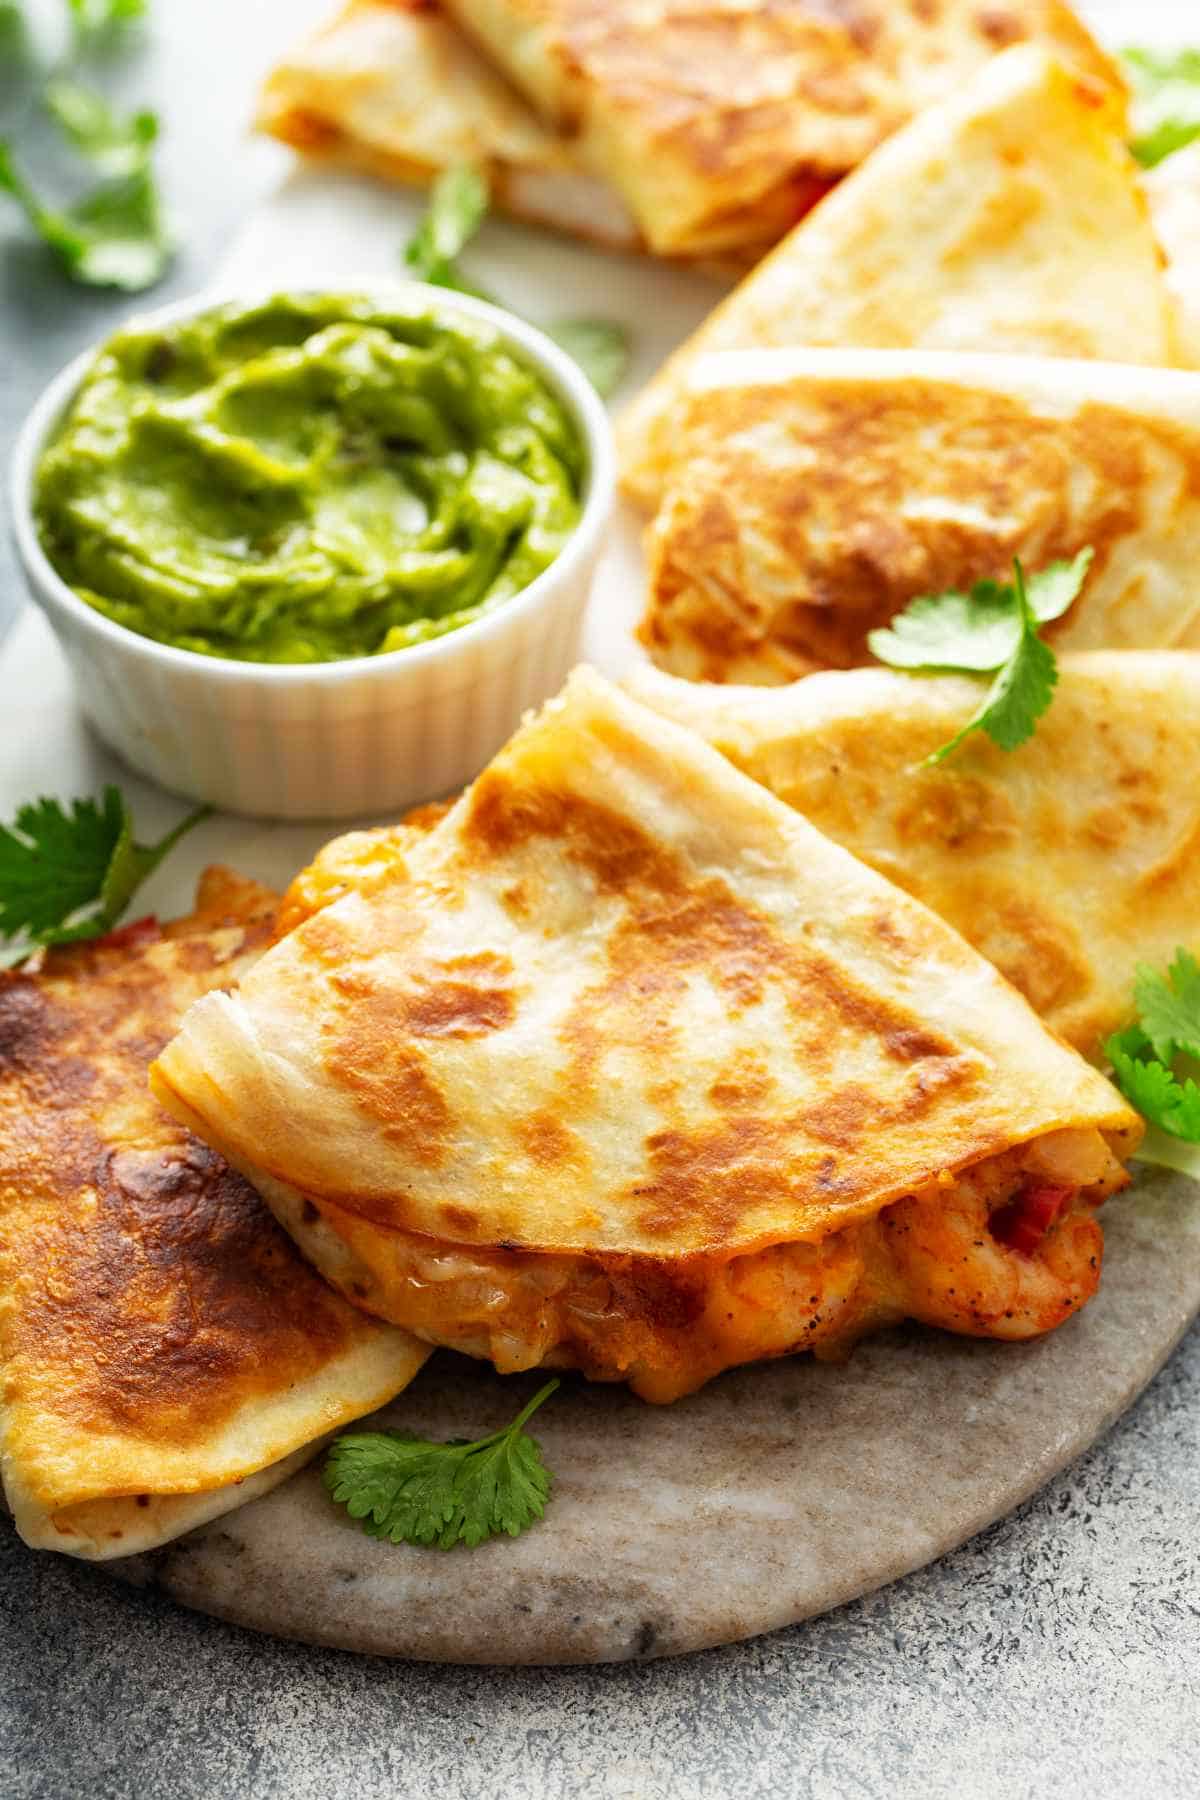 Shrimp and cheese quesadillas with red pepper and cilantro served with guacamole.